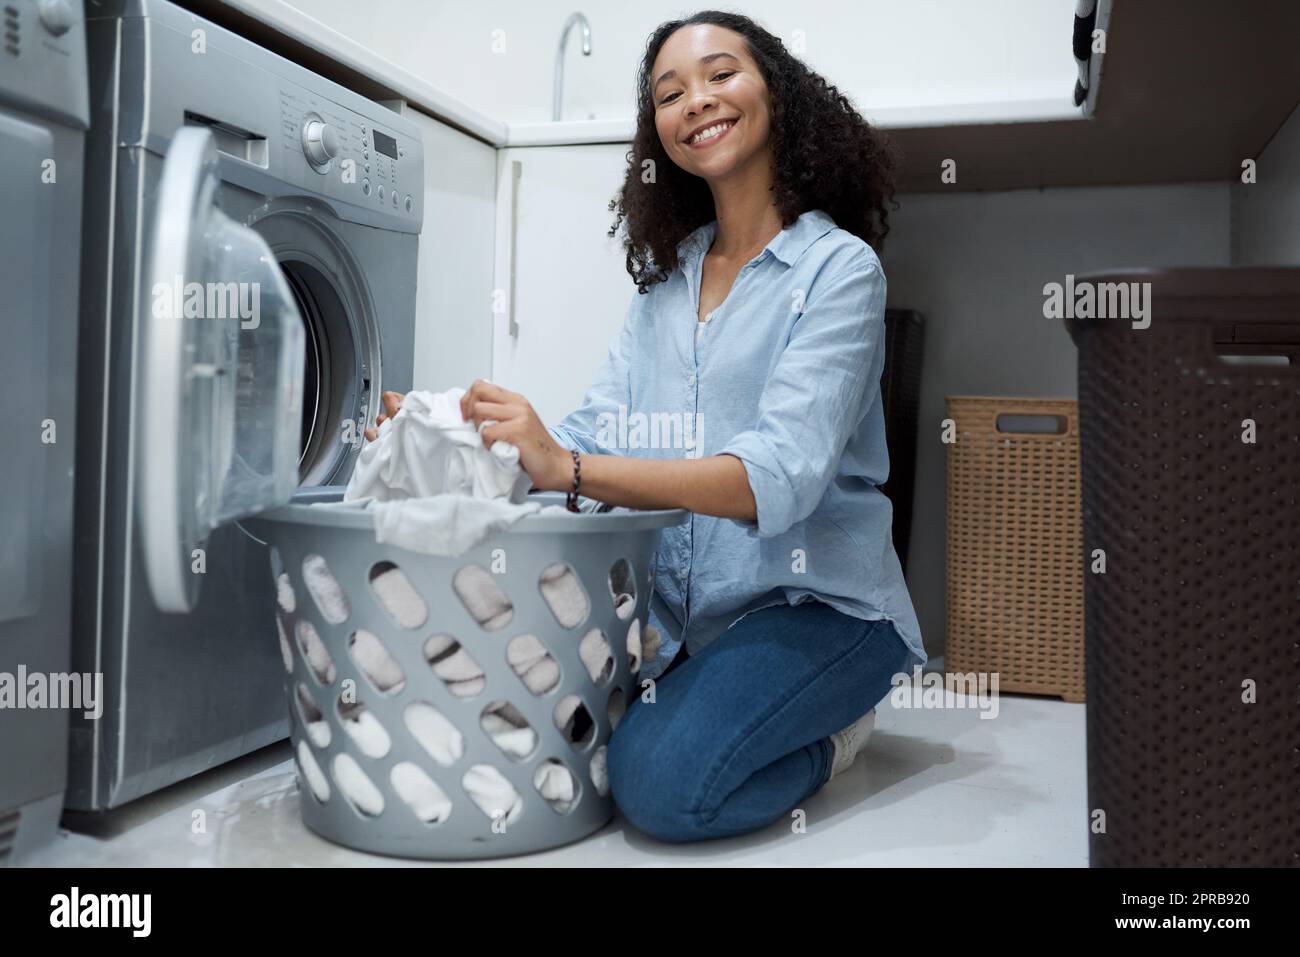 Nothing like a fresh clean load of washing. a young woman preparing to wash a load of laundry at home. Stock Photo